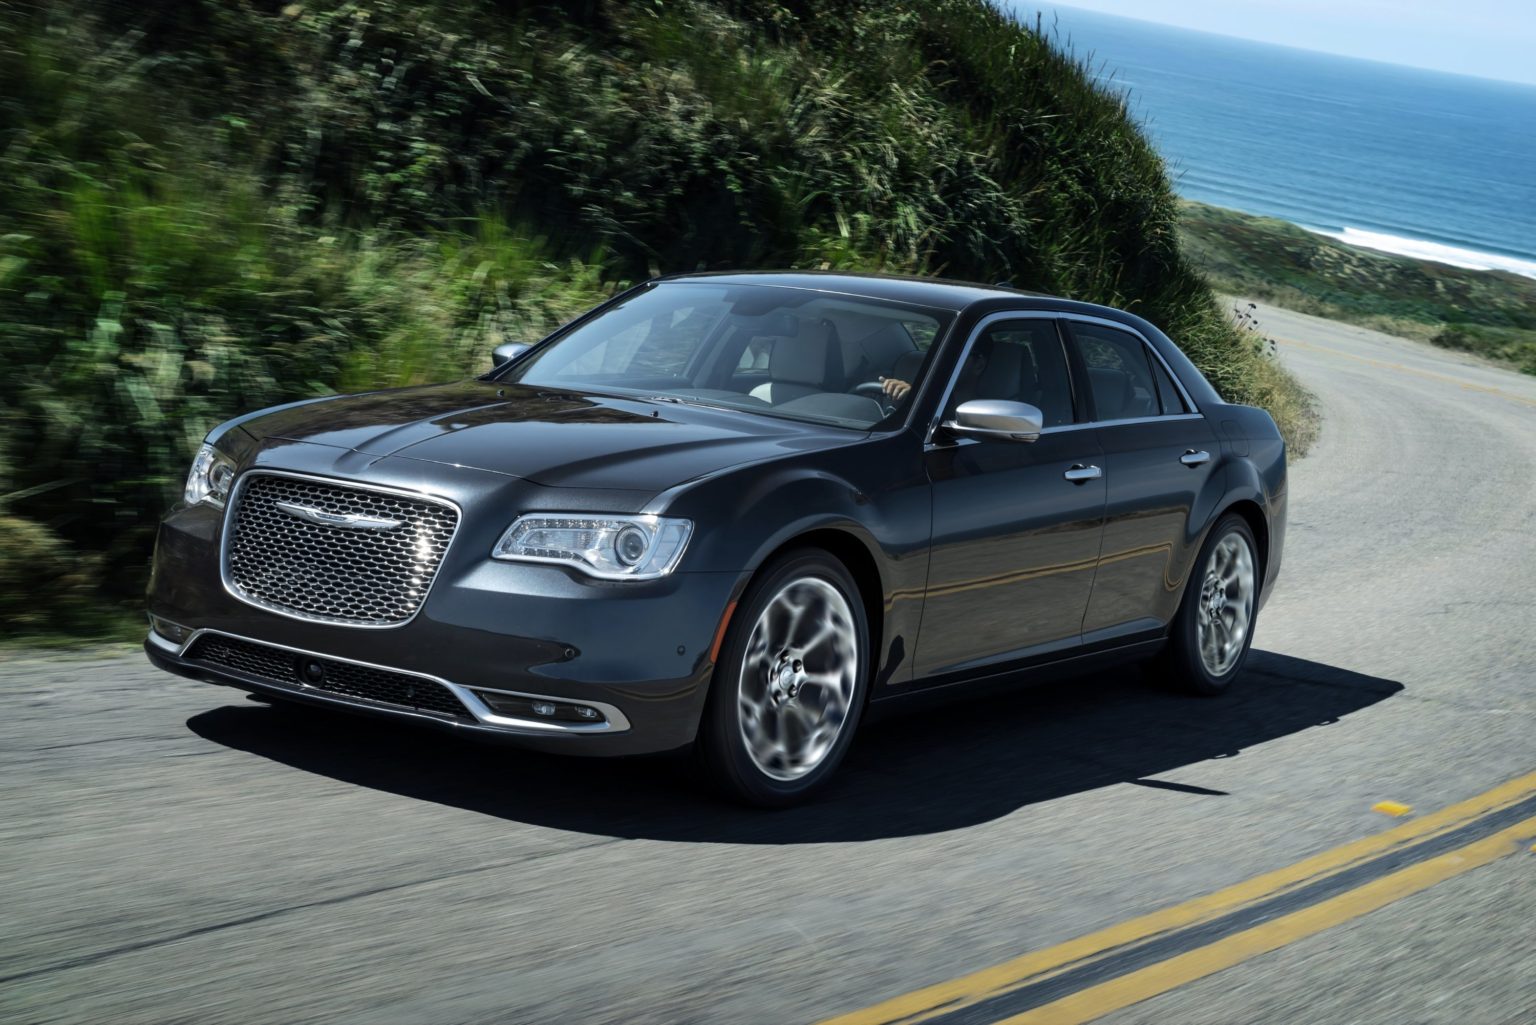 The Chrysler 300 hasn't been updated much for the 2020 model year, but does get additional options.